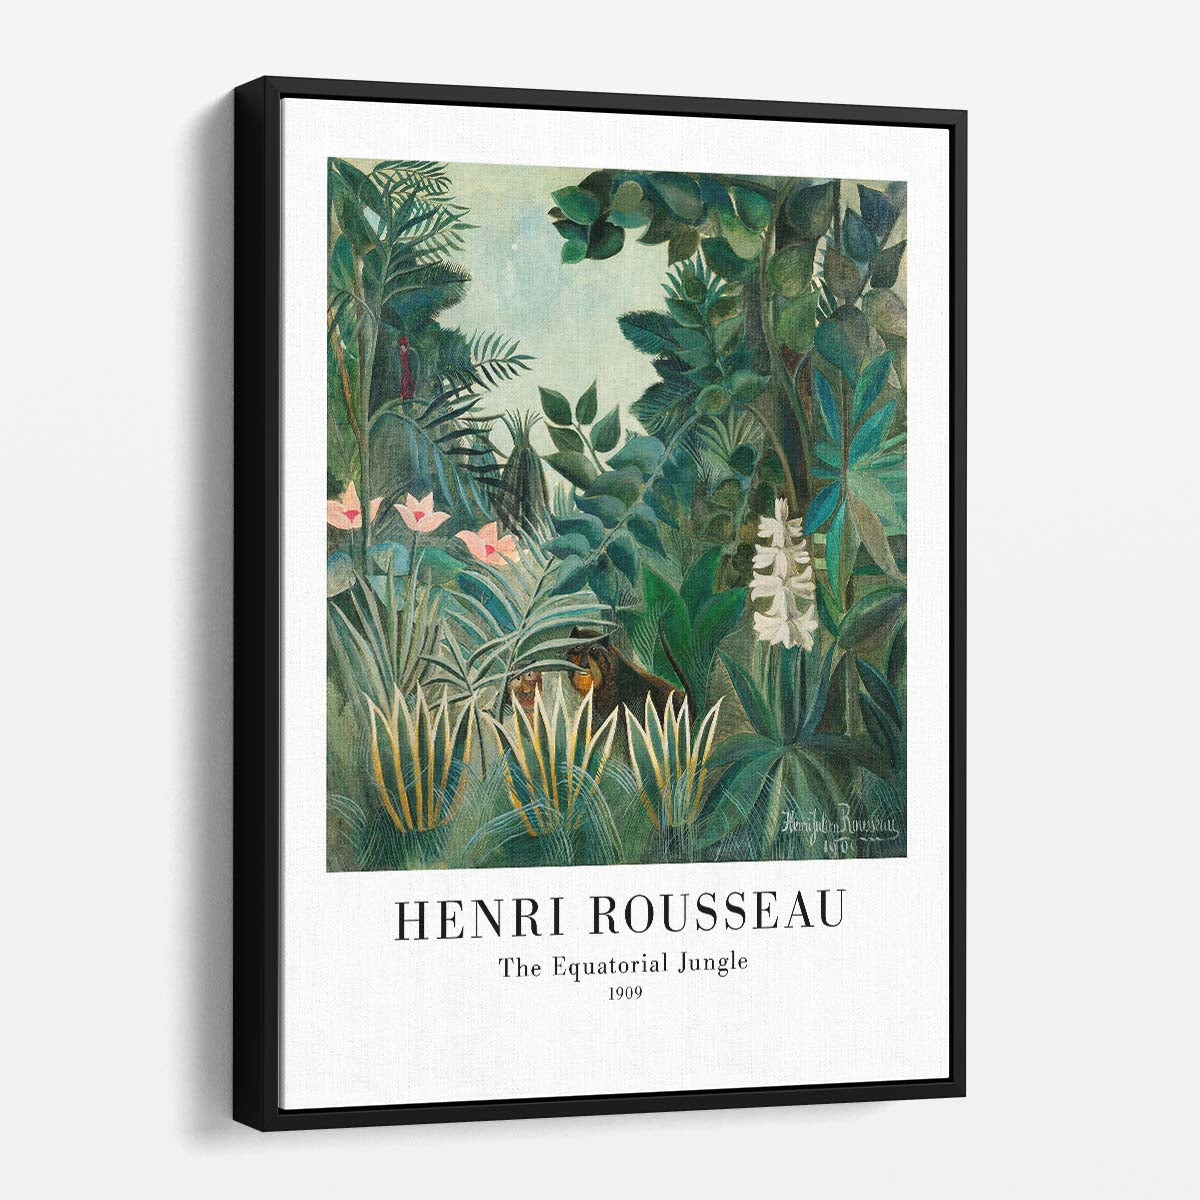 Exotic Tropical Jungle Acrylic Painting by Master Artist Henri Rousseau by Luxuriance Designs, made in USA